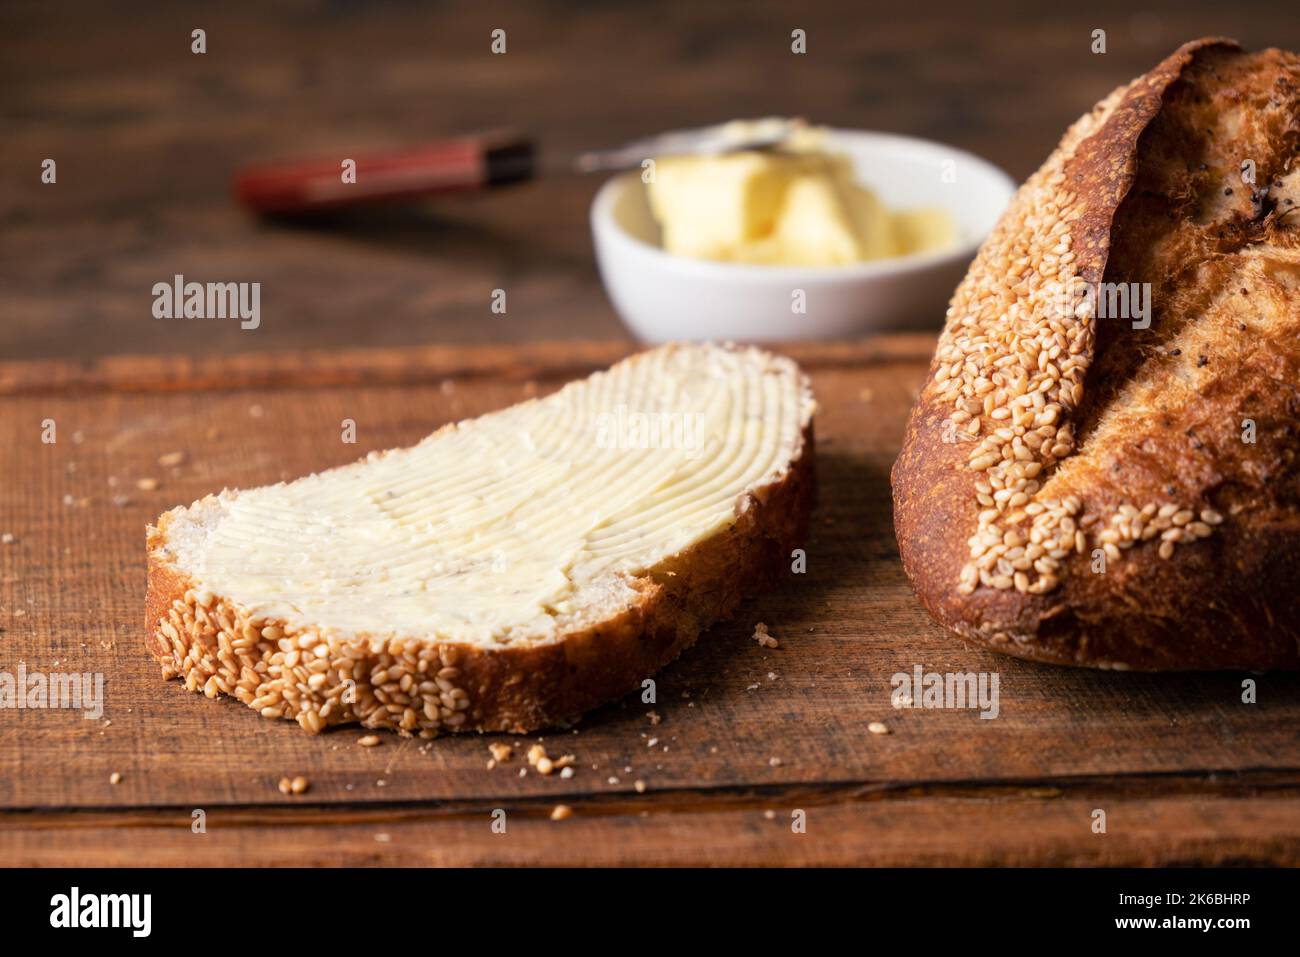 Bread with butter on wooden board. Closeup view Stock Photo